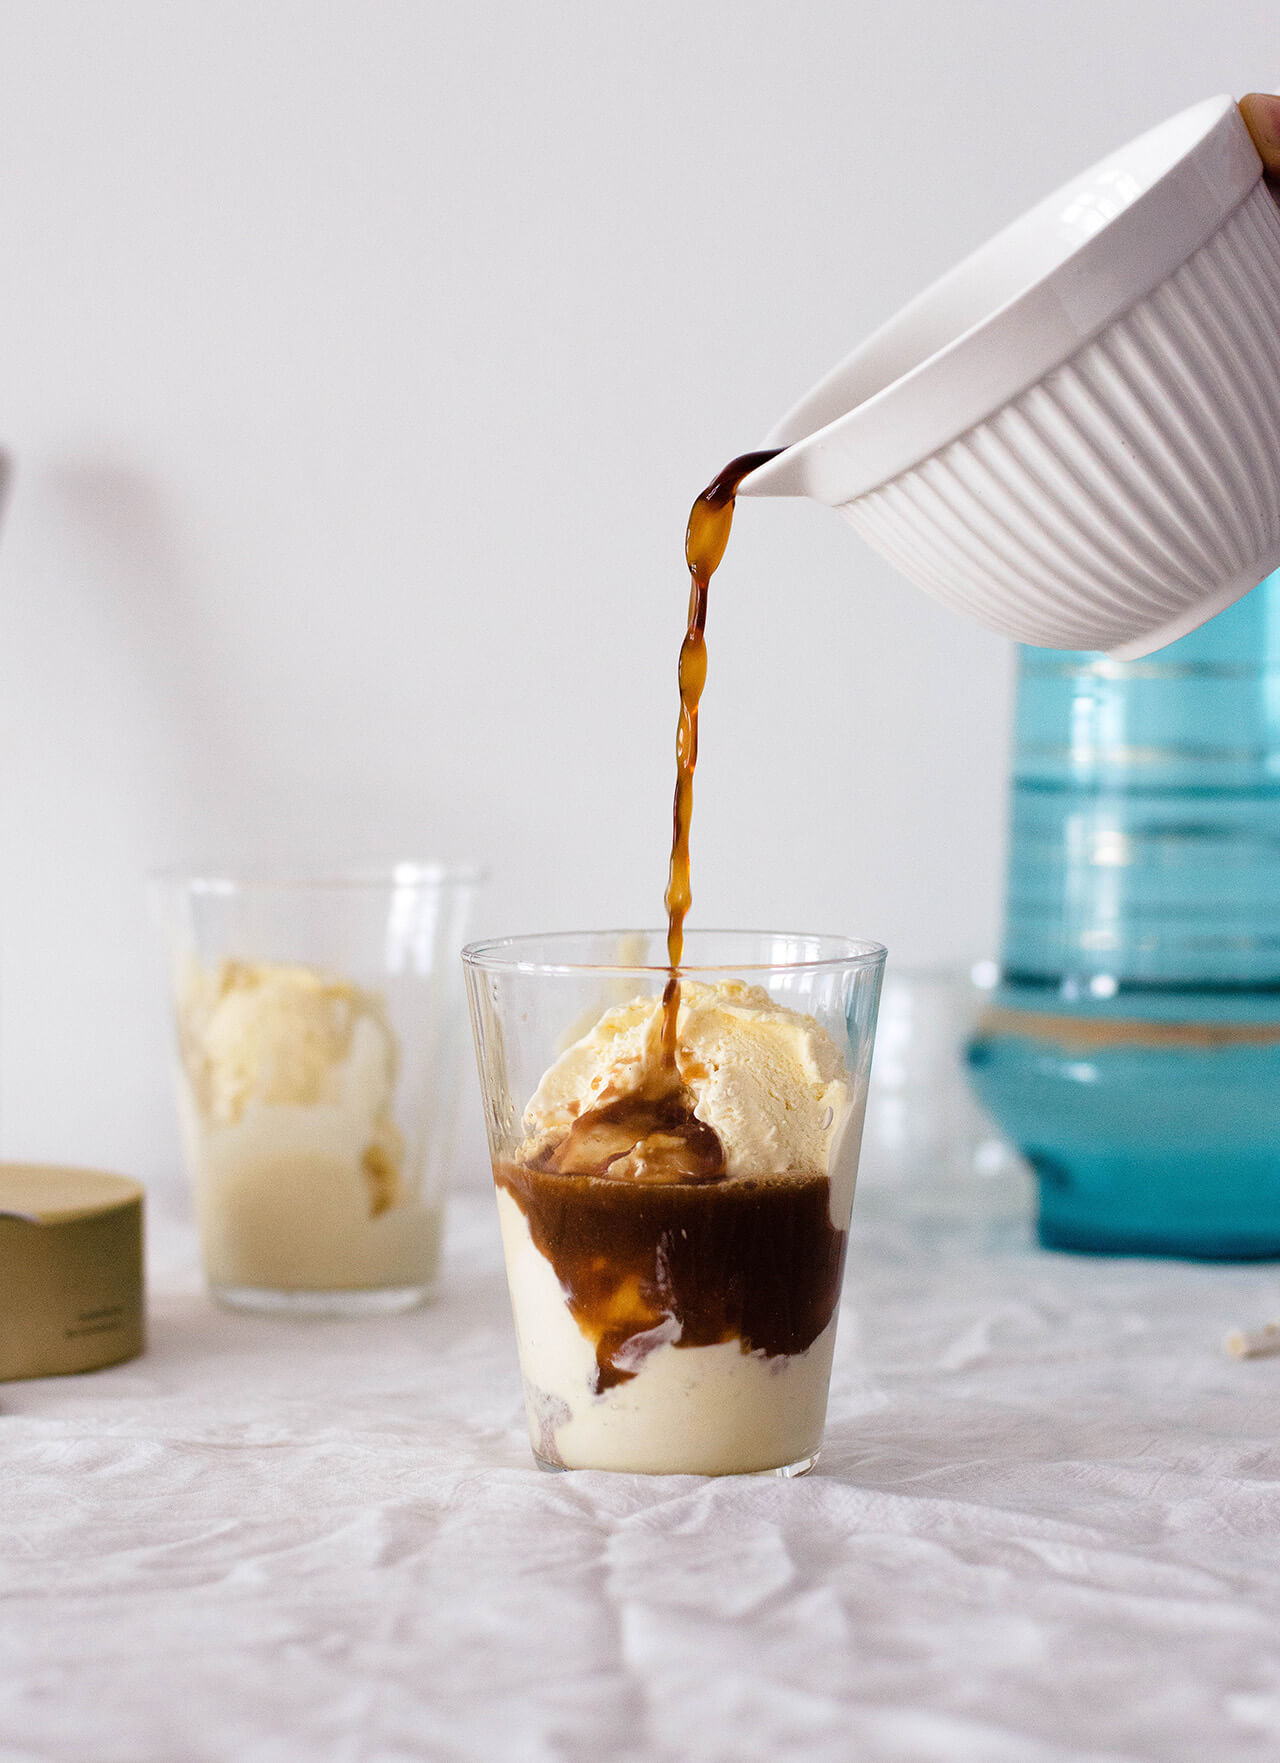 Ice cream iced coffee with whipped cream is a classic summer treat that every coffee lover adores.